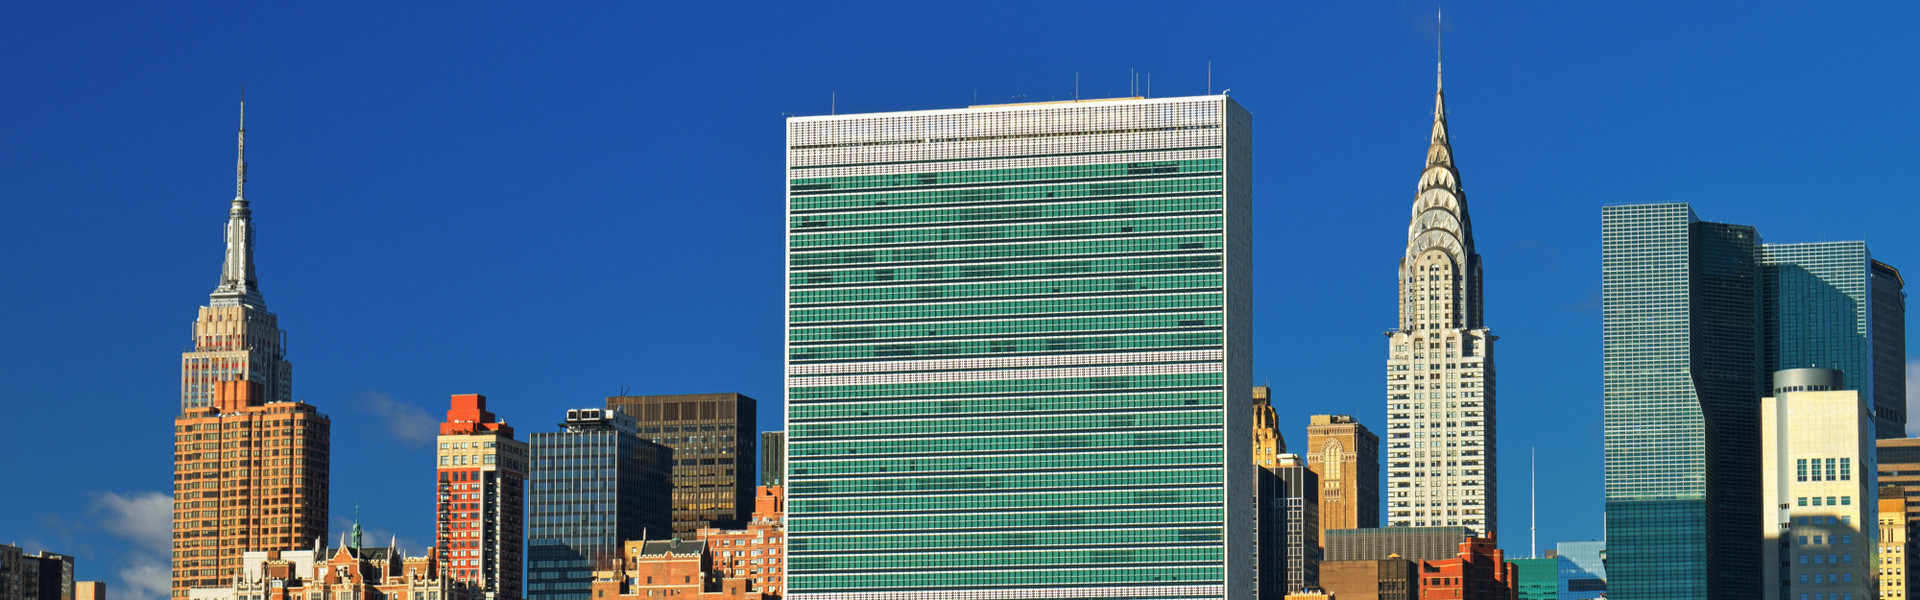 united nations new york tour tickets